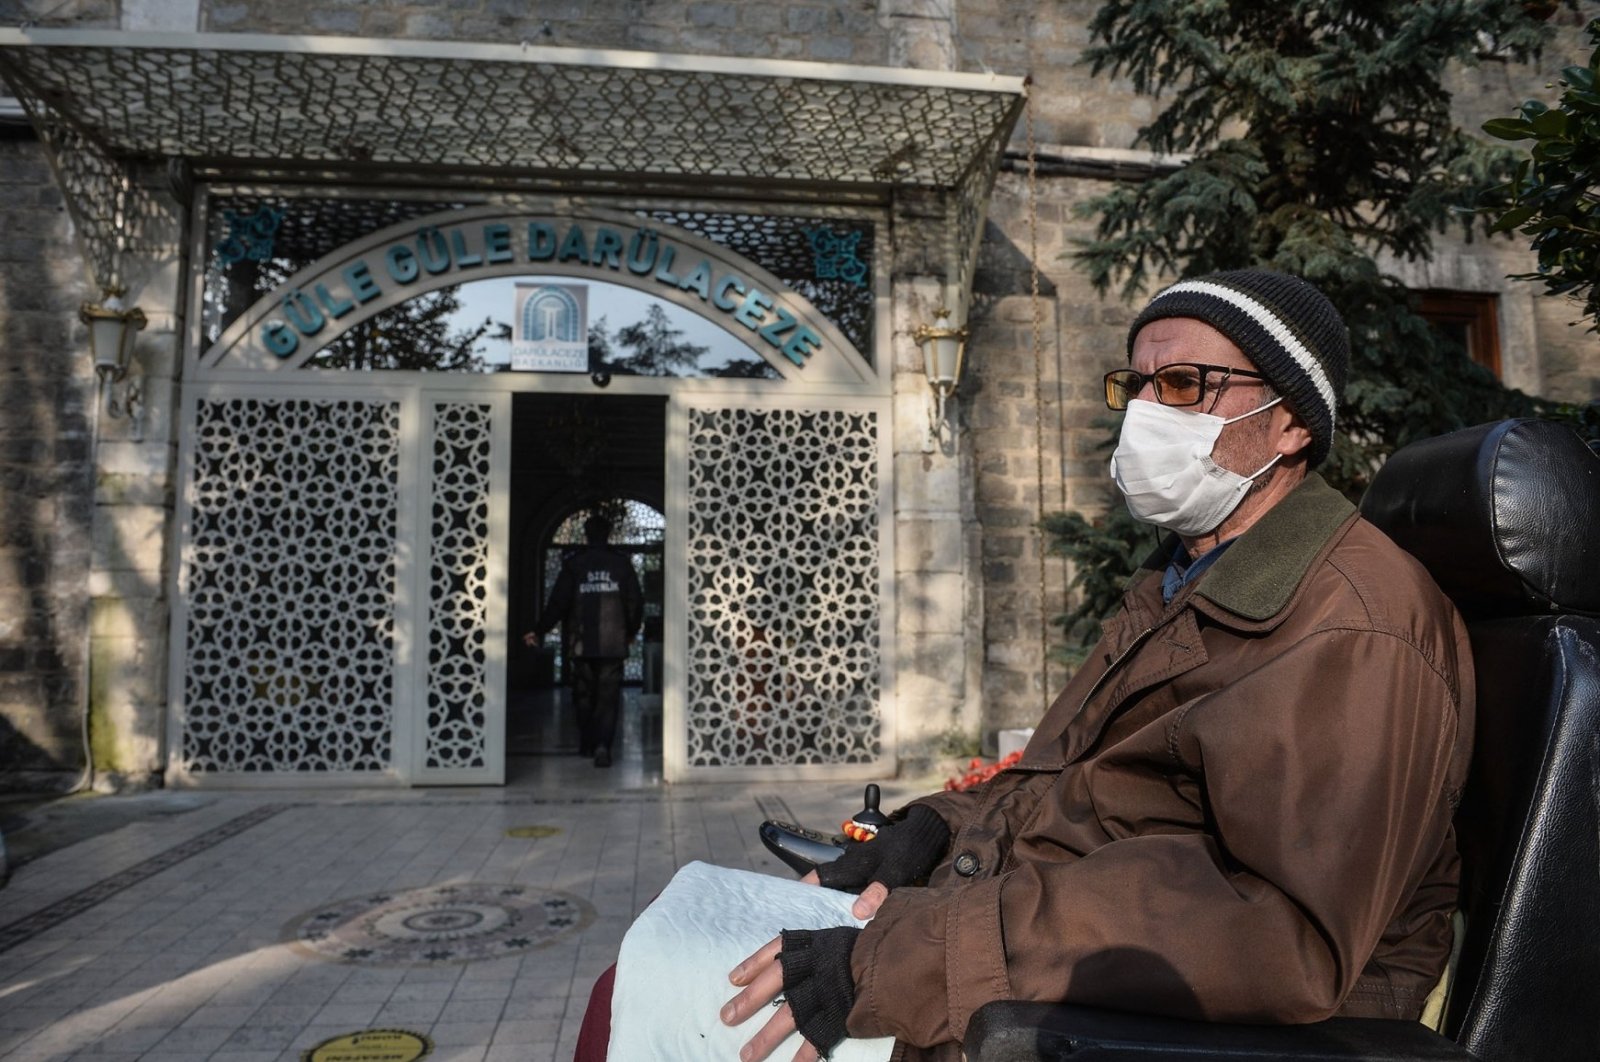 A resident sits in his wheelchair in front of the door of Darülaceze nursing home, in Istanbul, Turkey, Dec. 1, 2020. (DHA PHOTO)